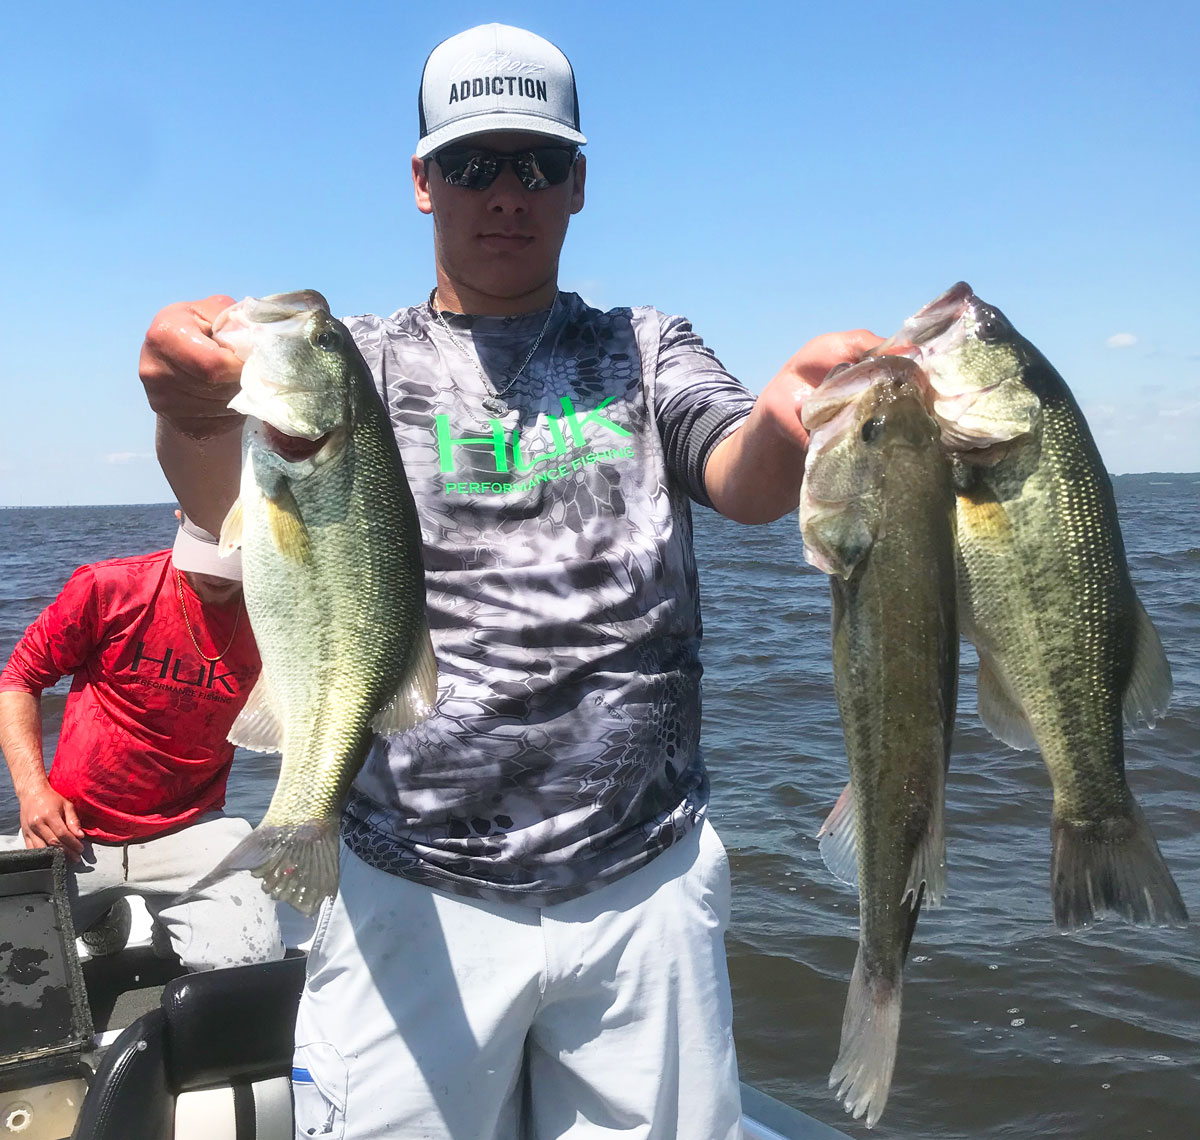 Hunter Martin with a nice stringer he caught scouting for the Louisiana High School State tournament on Toledo Bend.